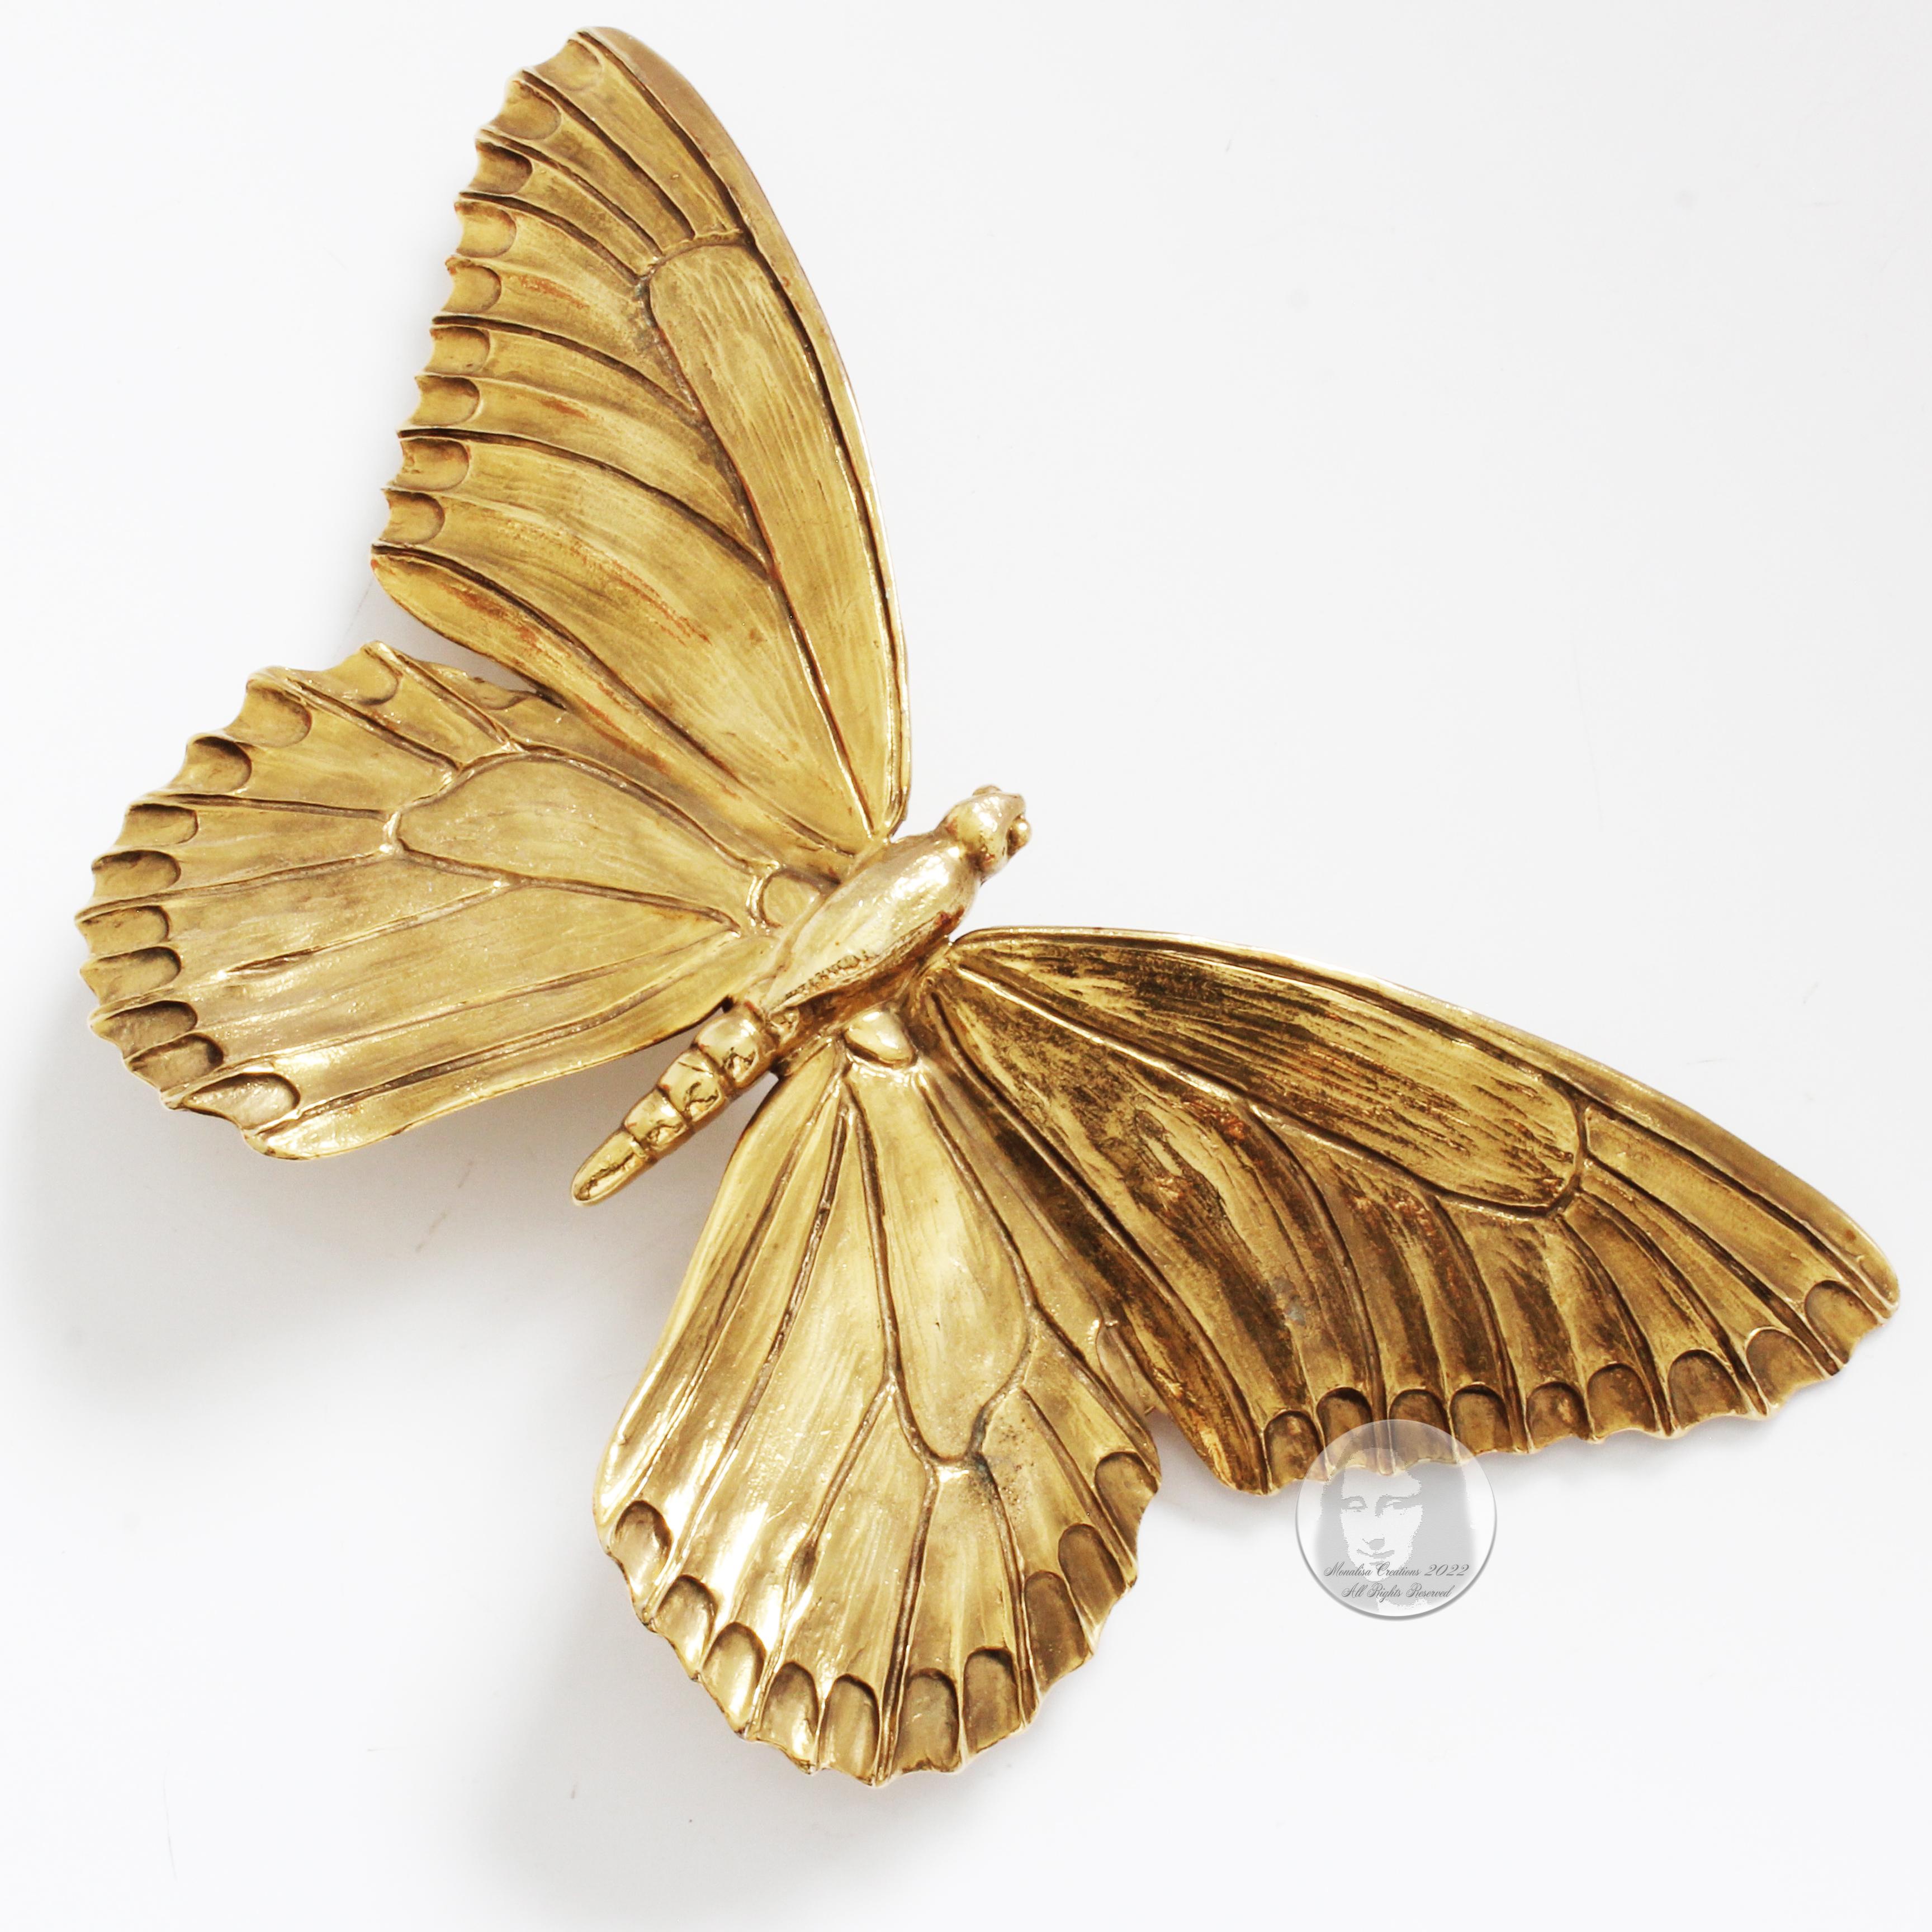 This fantastic butterfly belt buckle was designed by NY artist Christopher Ross in the 1980s. The artist enjoyed a resurgence in popularity in the fashion blogs and magazines after being used by Patricia Field in the Sex & The City Movies. 

Made